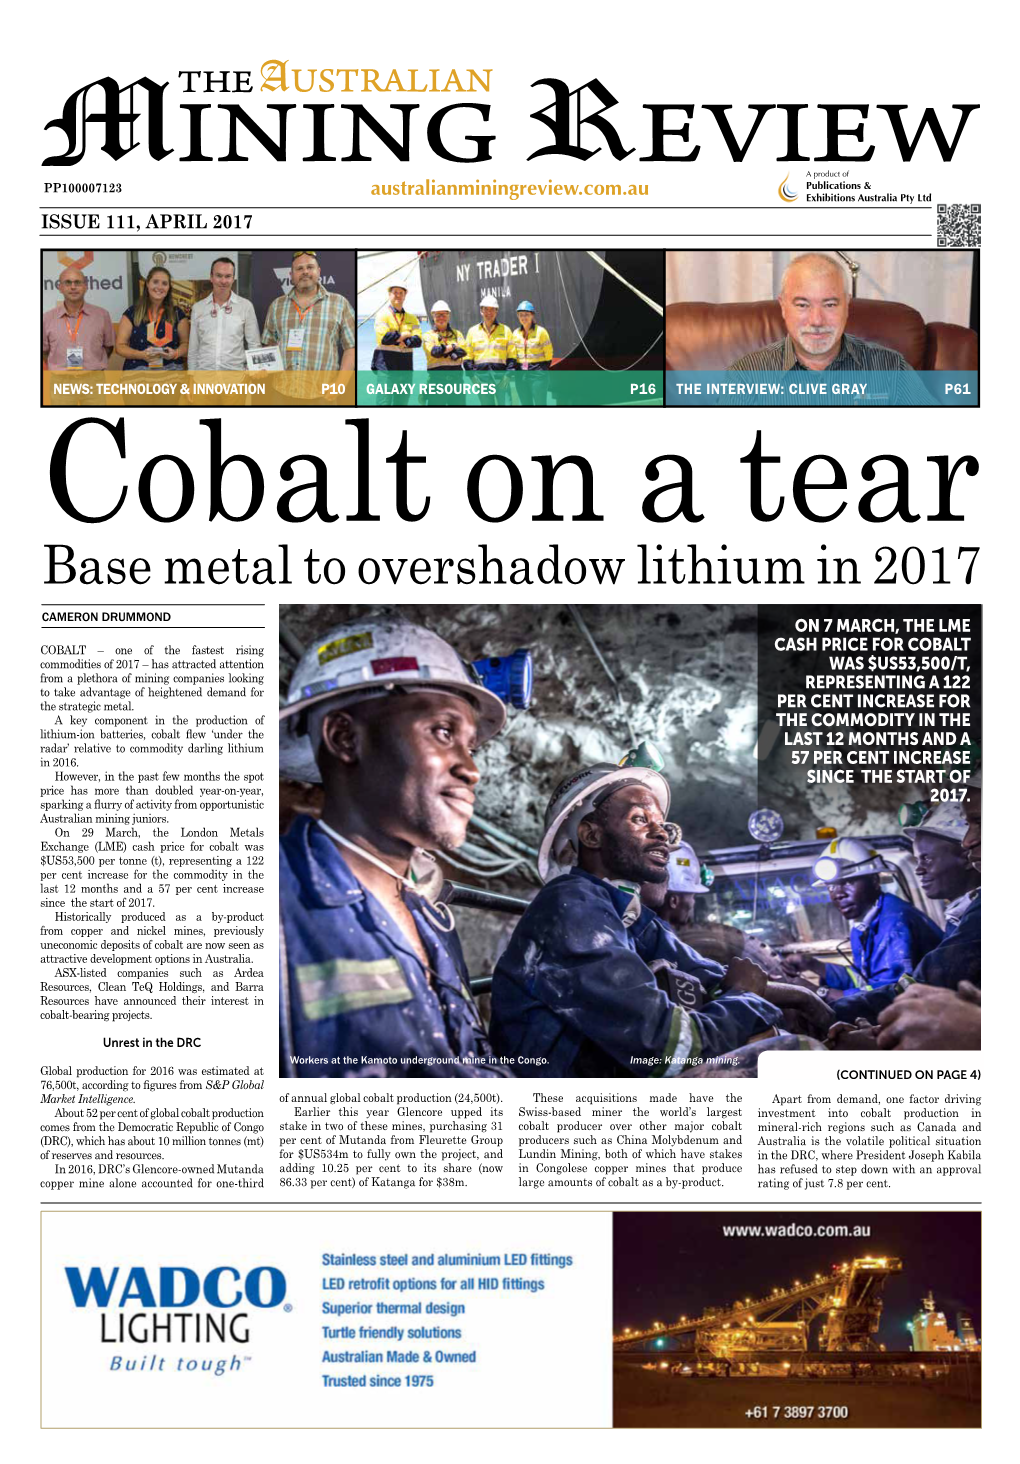 Base Metal to Overshadow Lithium in 2017